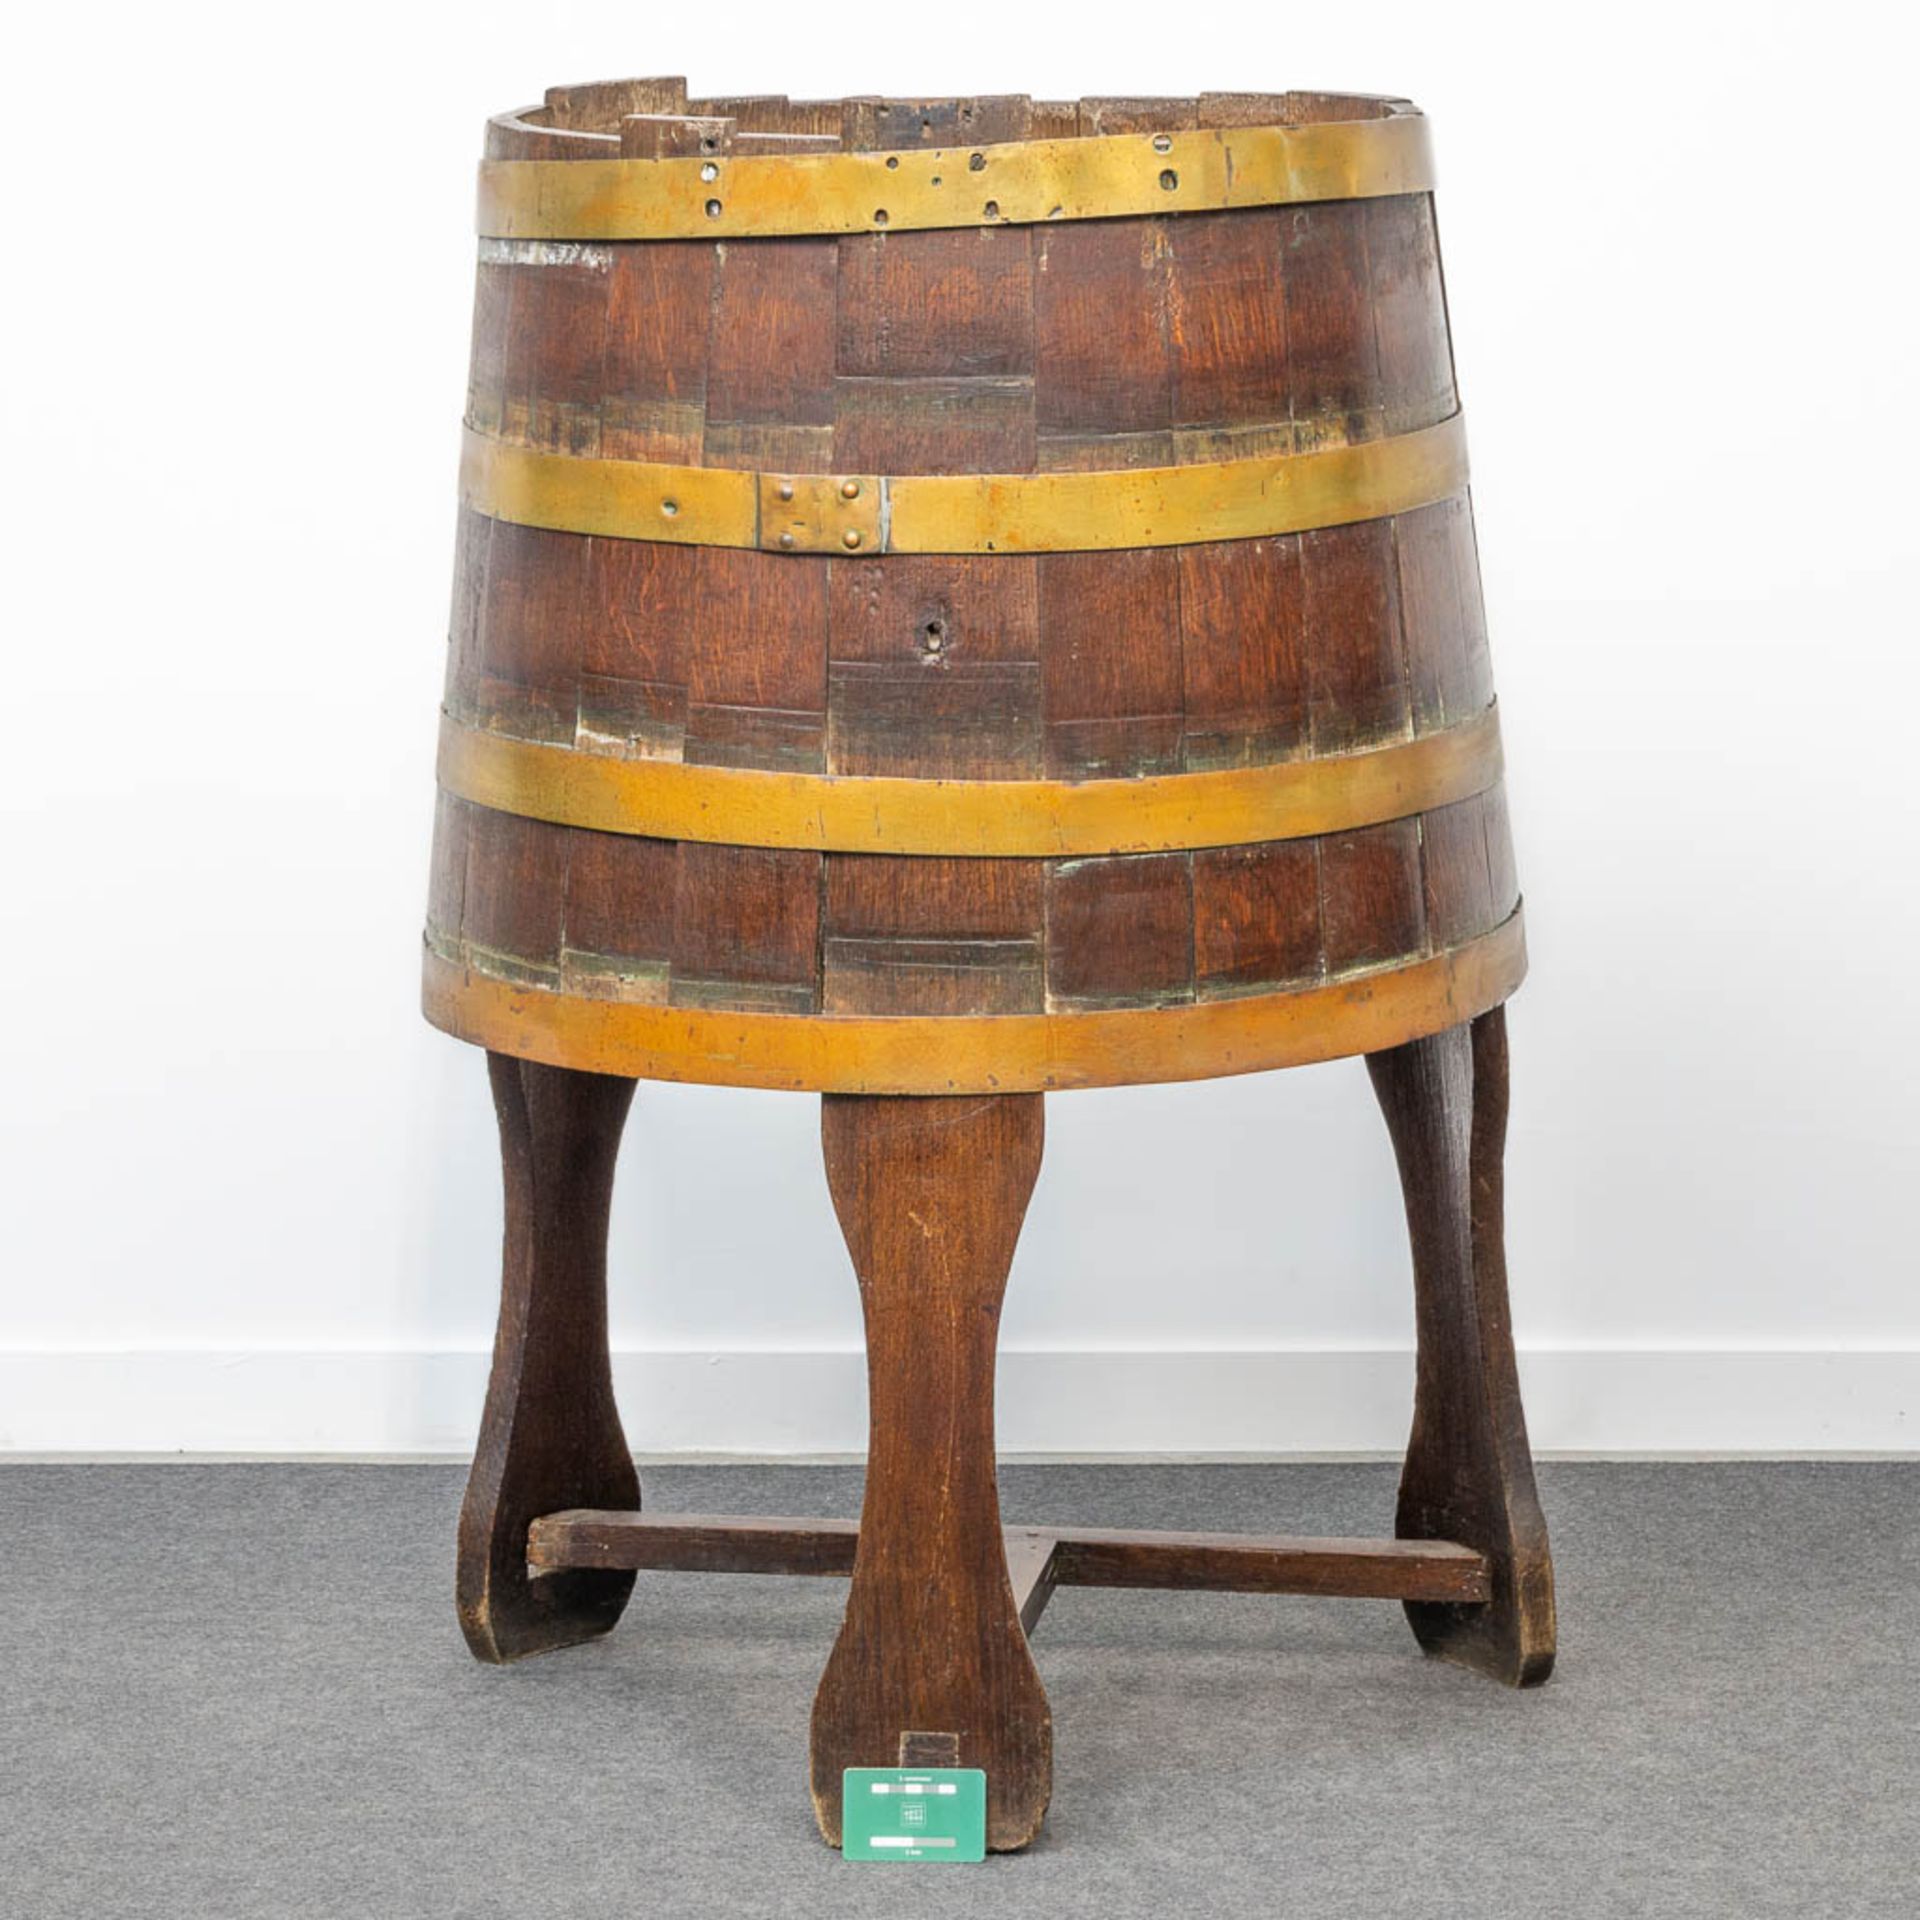 A churn standing on a base, made of oak and brass. (61 x 51 x 105 cm) - Image 5 of 6